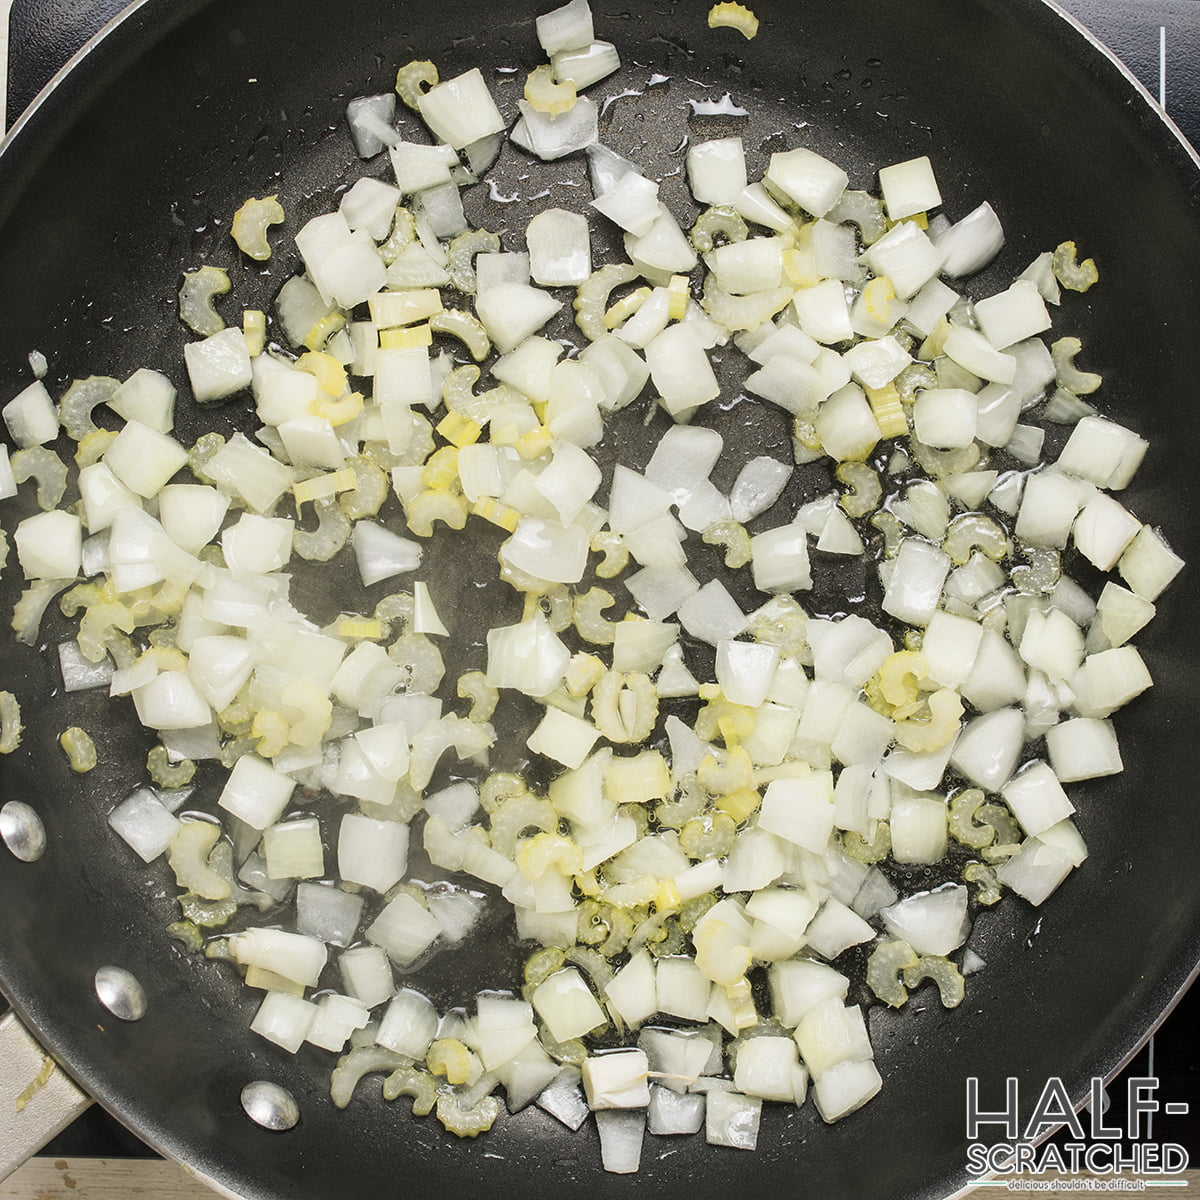 Onions and celery sautéing in a skillet